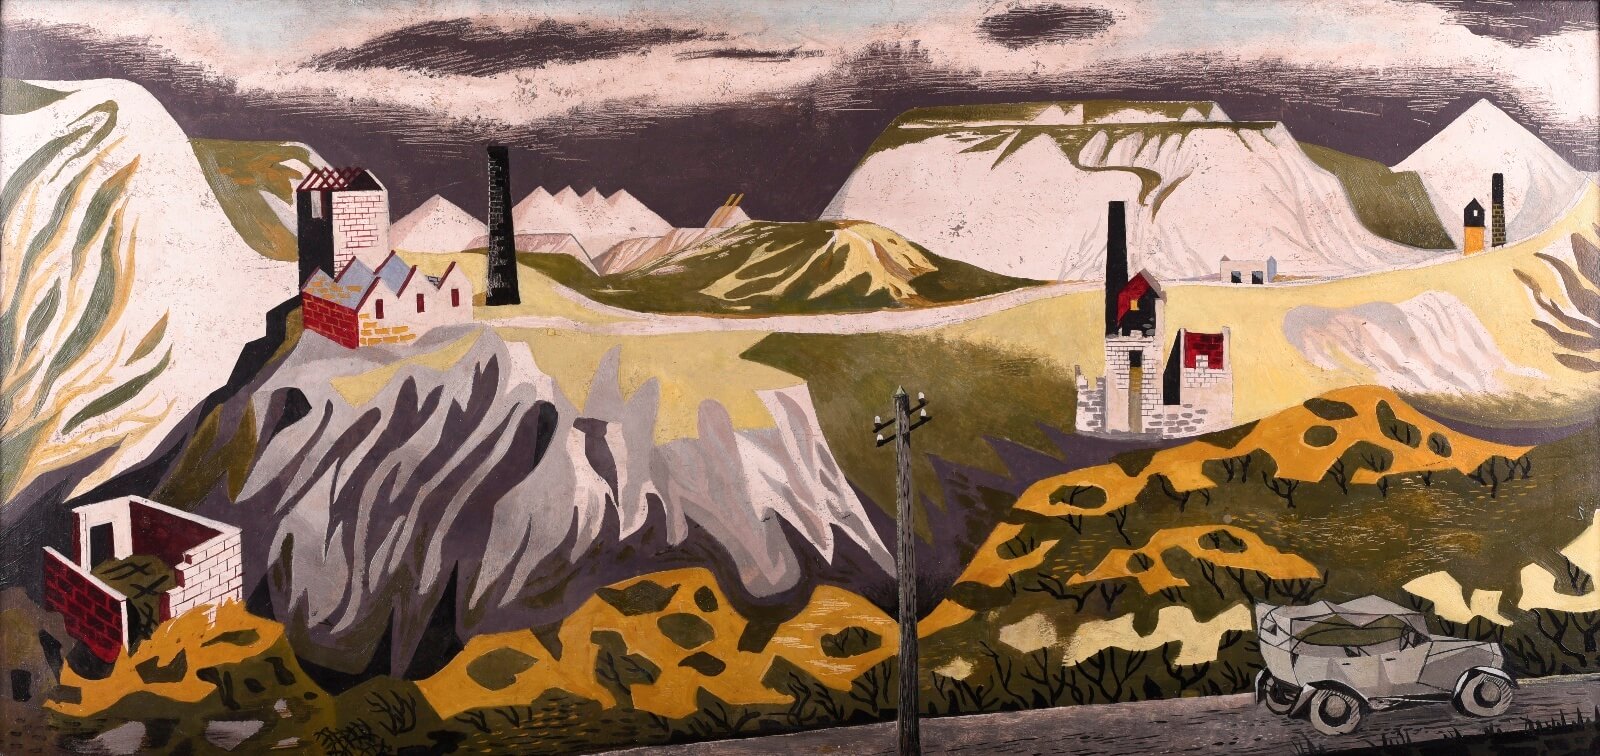 Mary Adshead - The Old Rolls on Bodmin Moor; China Clay Landscape